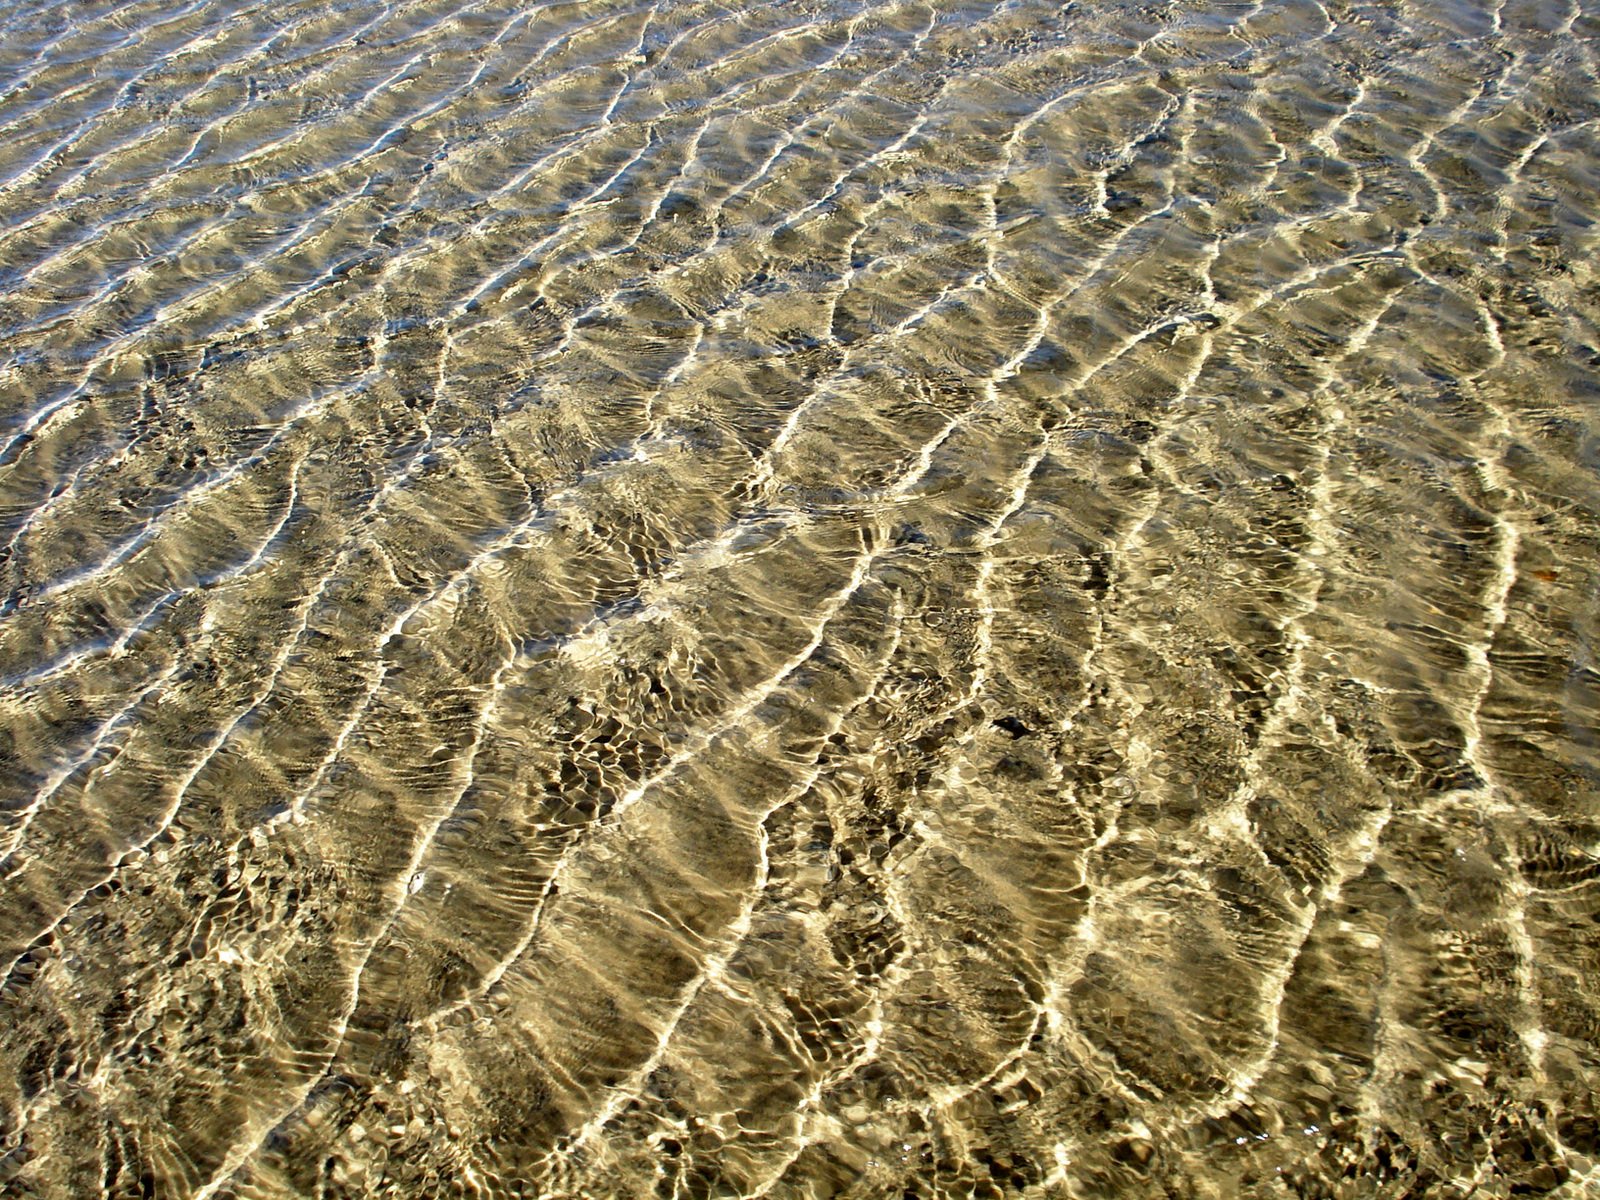 ripples and lines formed by waves on the water